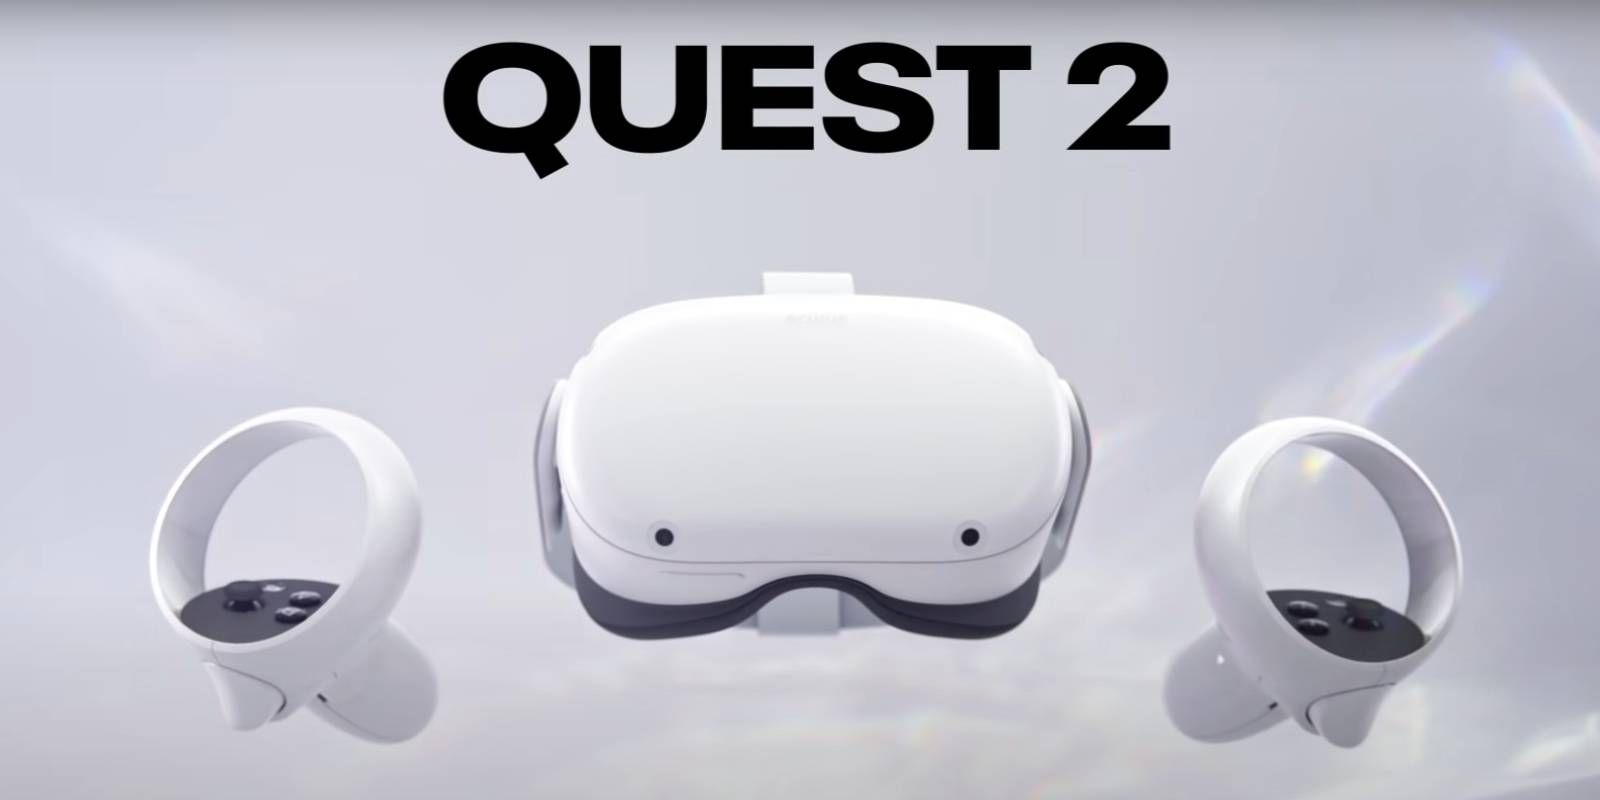 Meta Quest 2 Headset and Controllers from Announcement Trailer